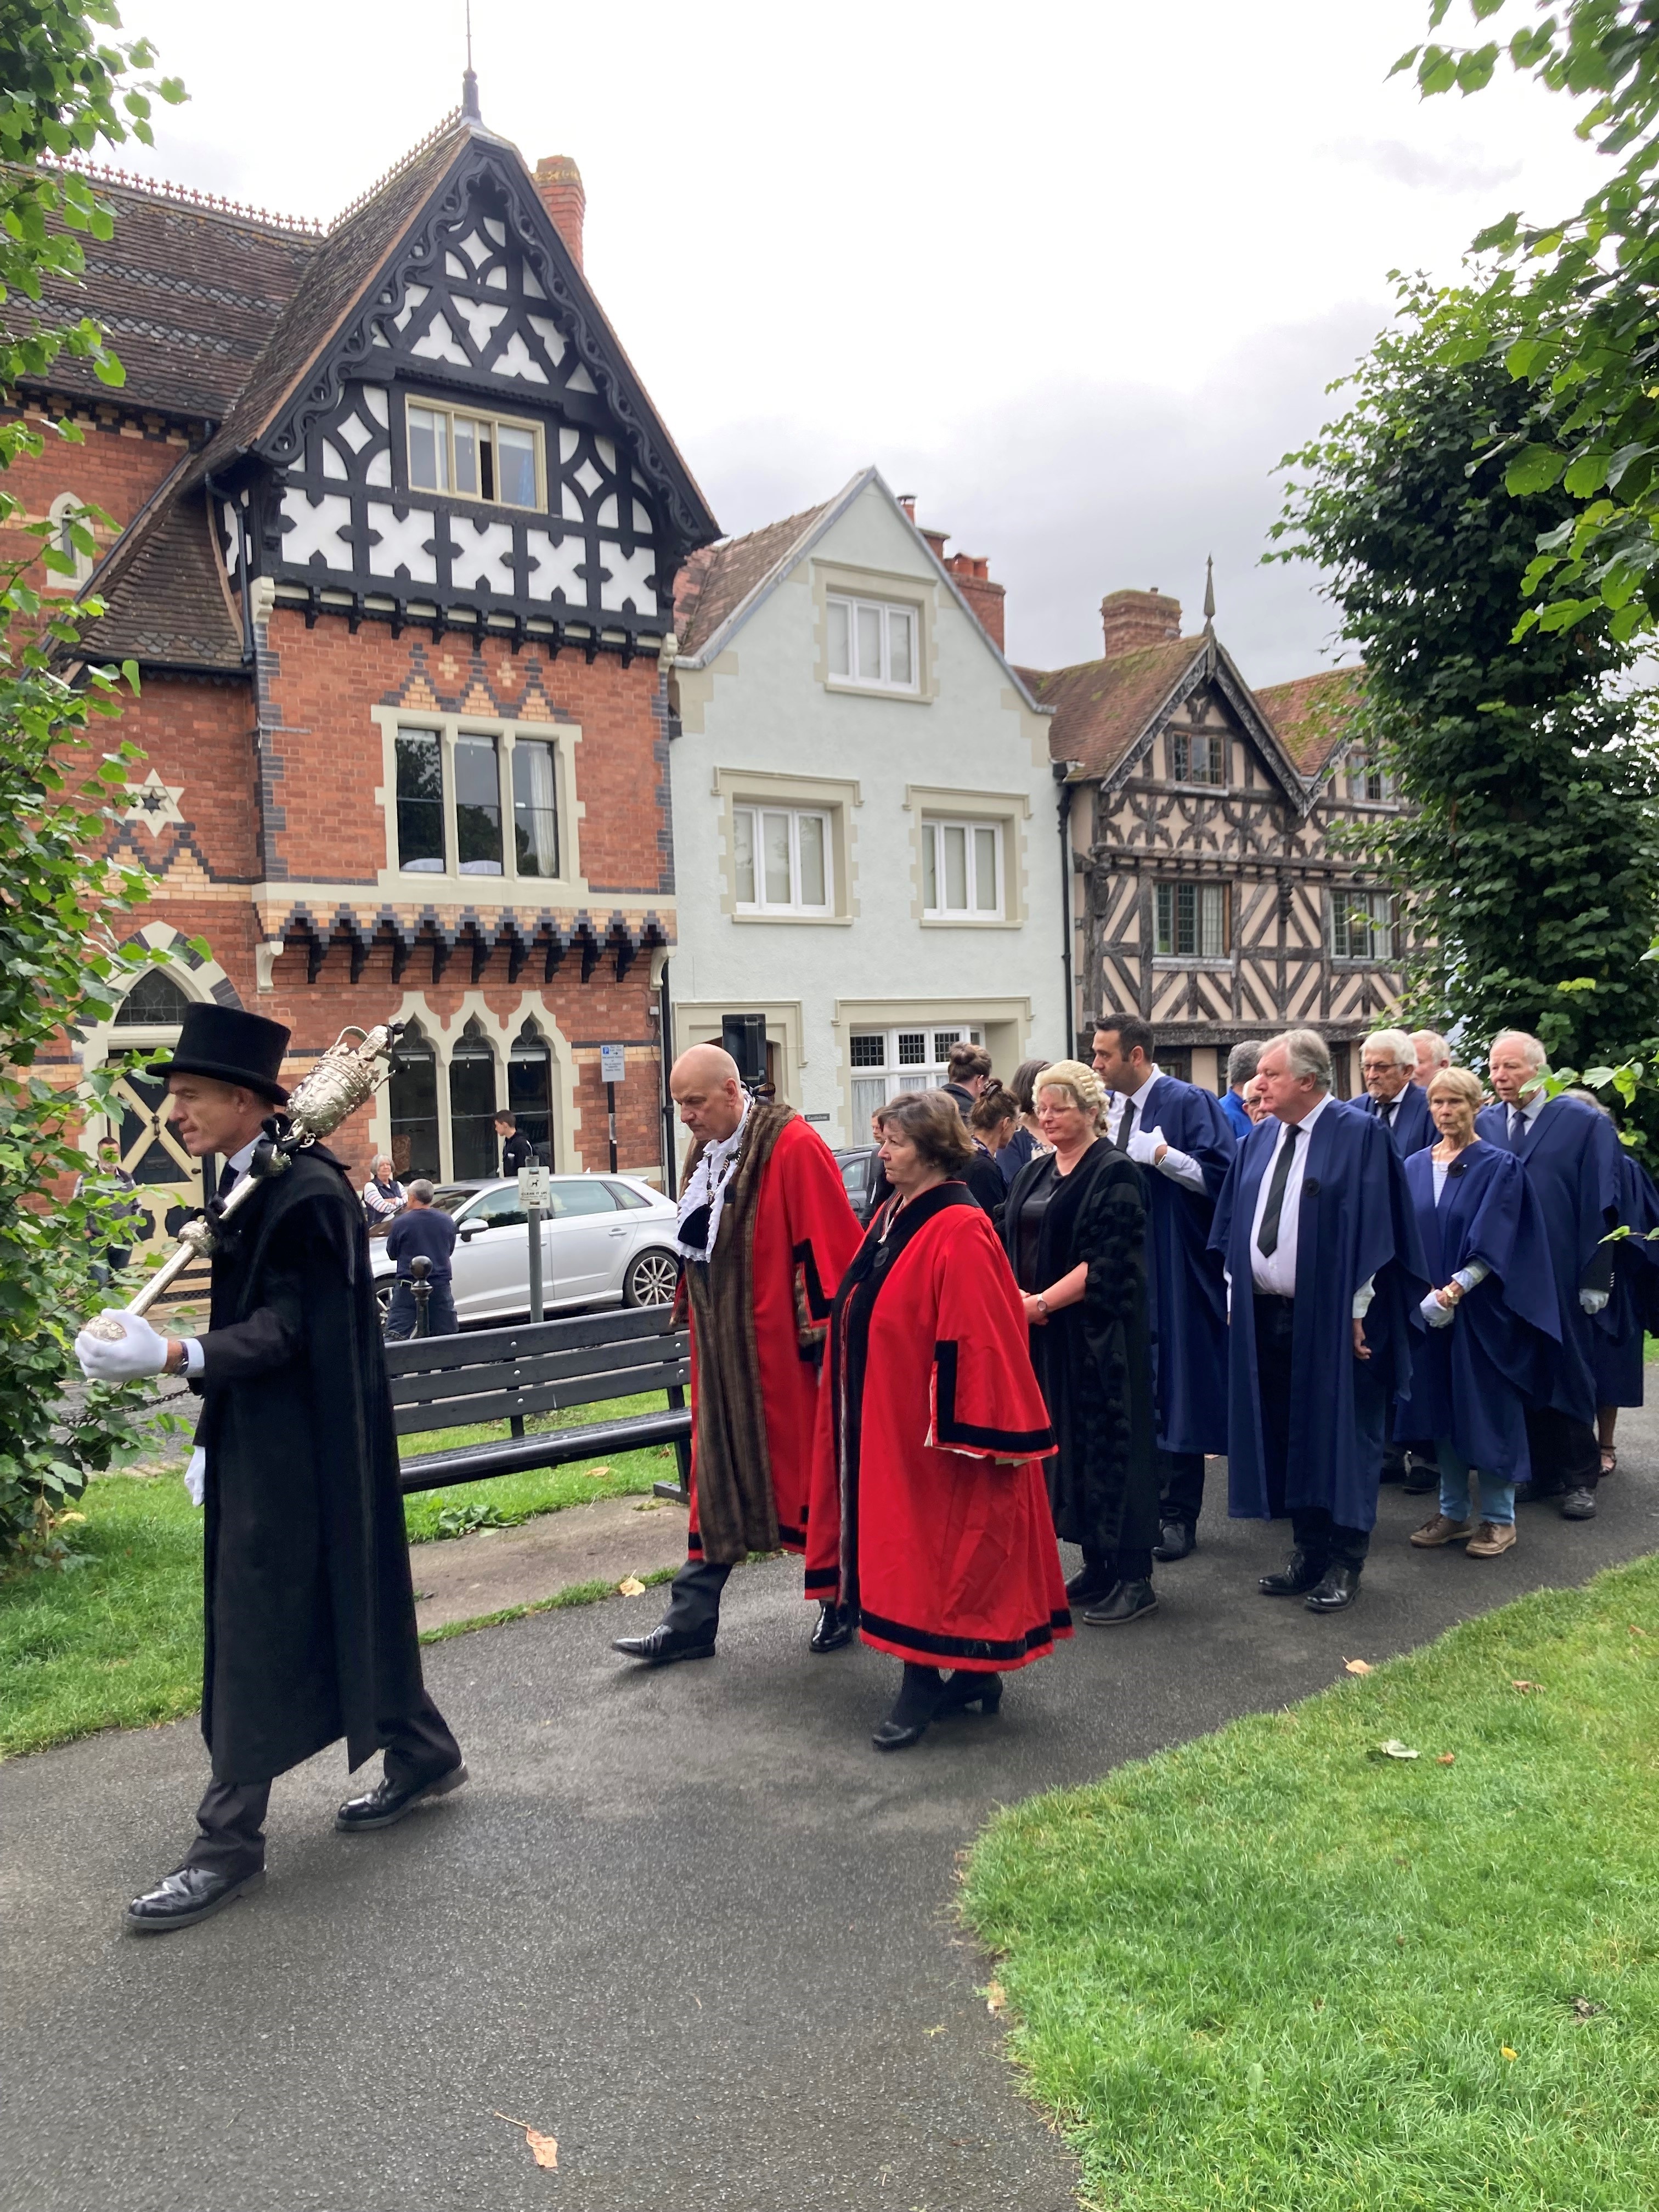 the mace bearer leads the procession of Councilors, the Mayor, the town clerk and other members of staff